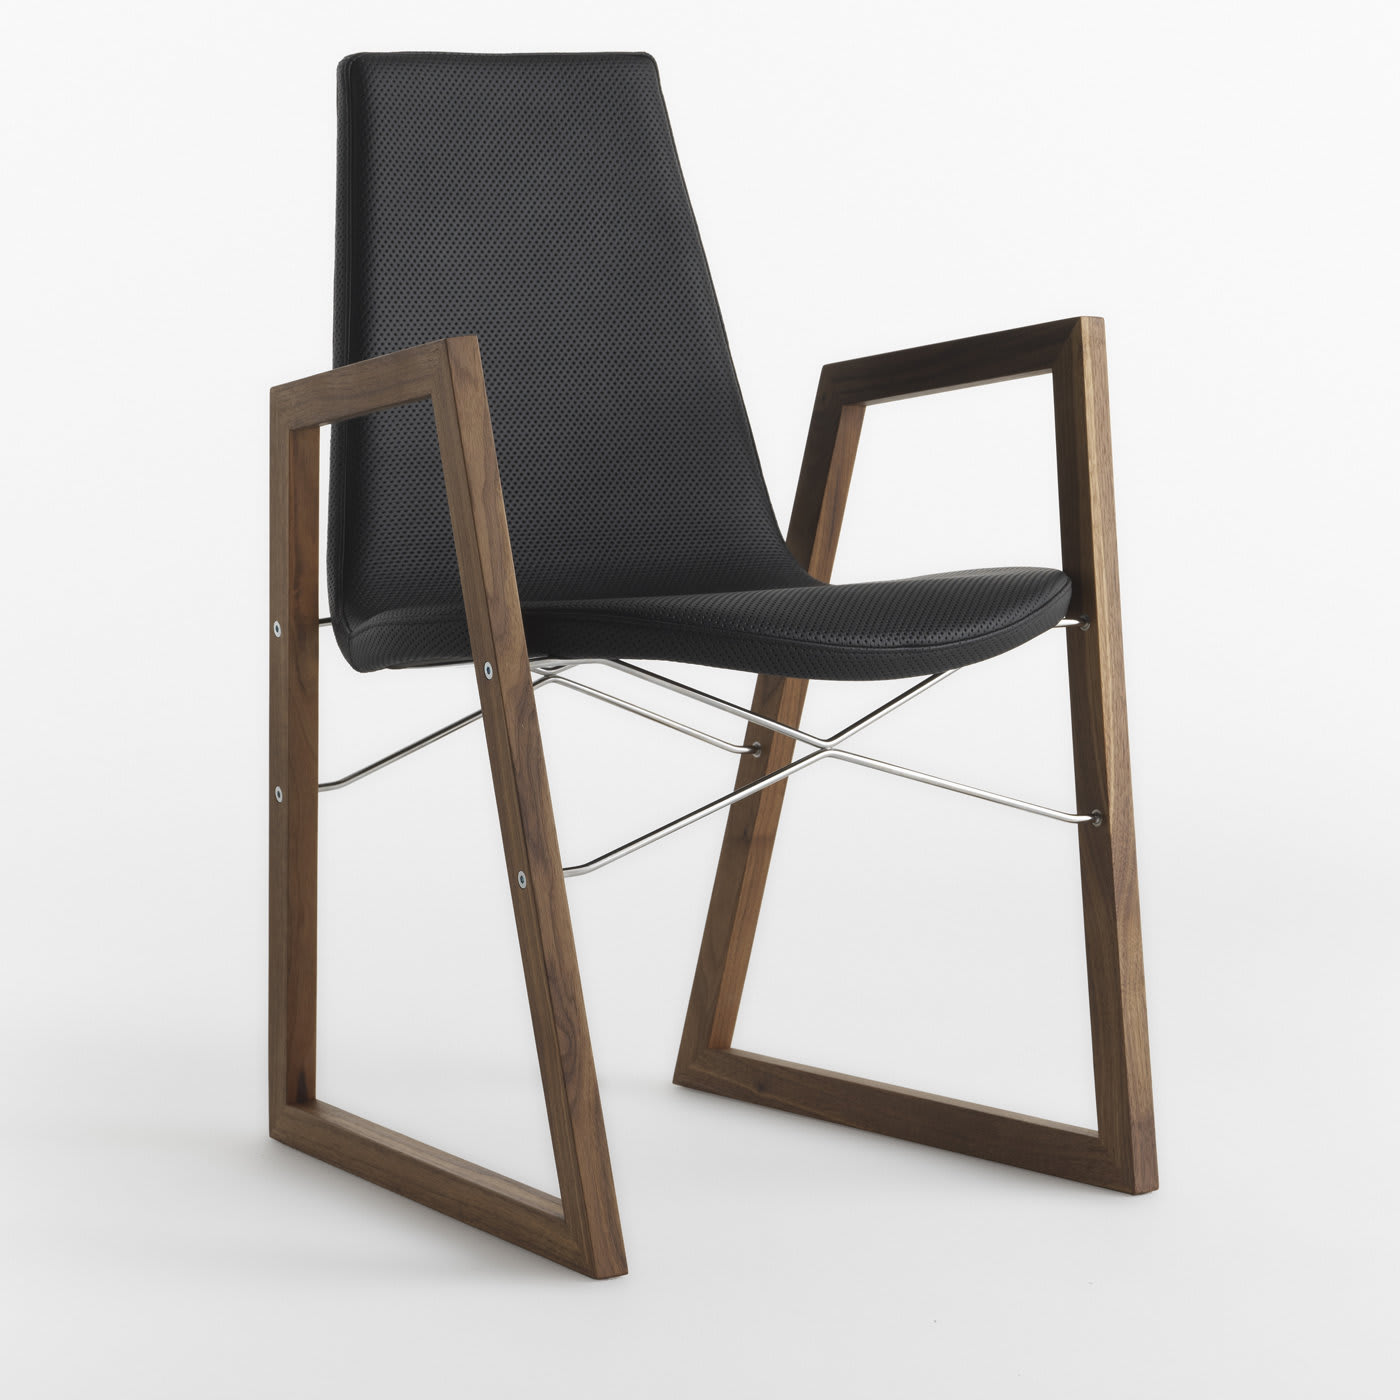 Ray Black Chair by Orlandini Design - Horm